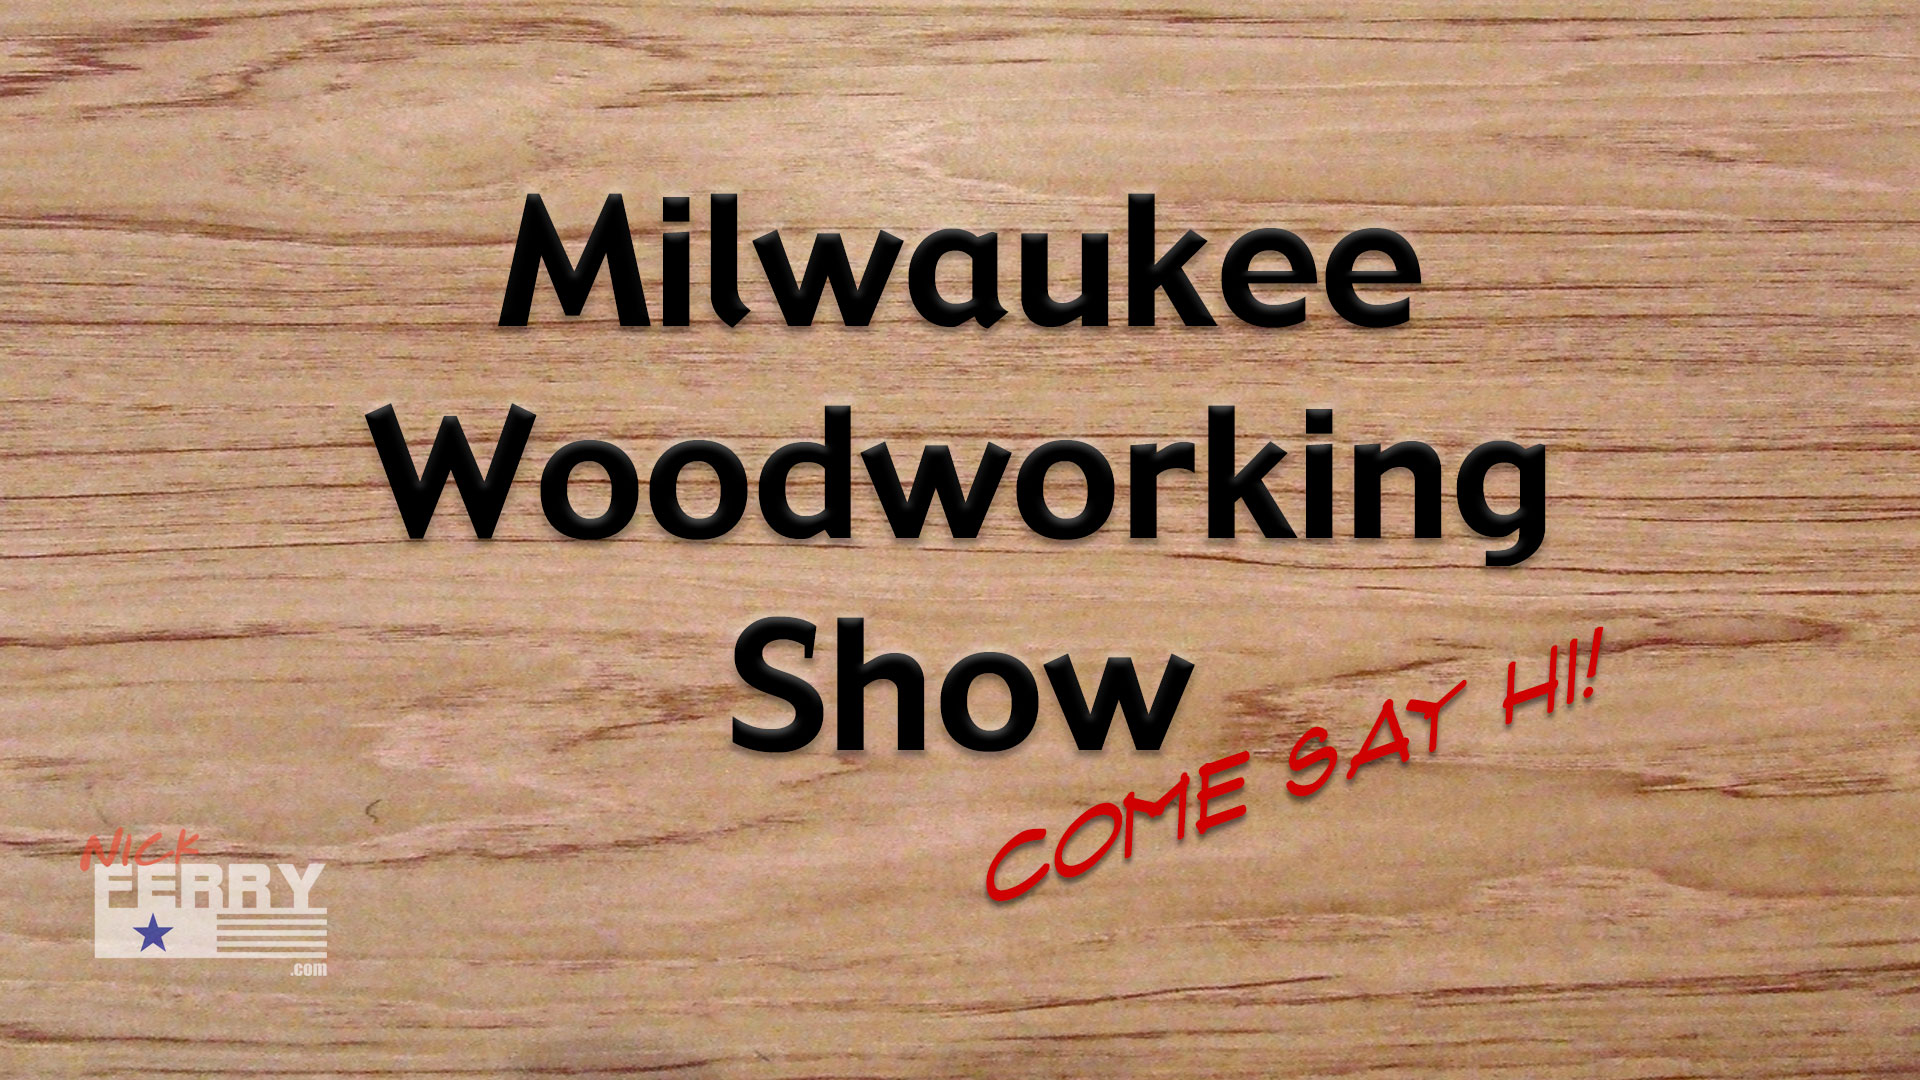  The Woodworking Shows Milwaukee 2016 Let s Meet 